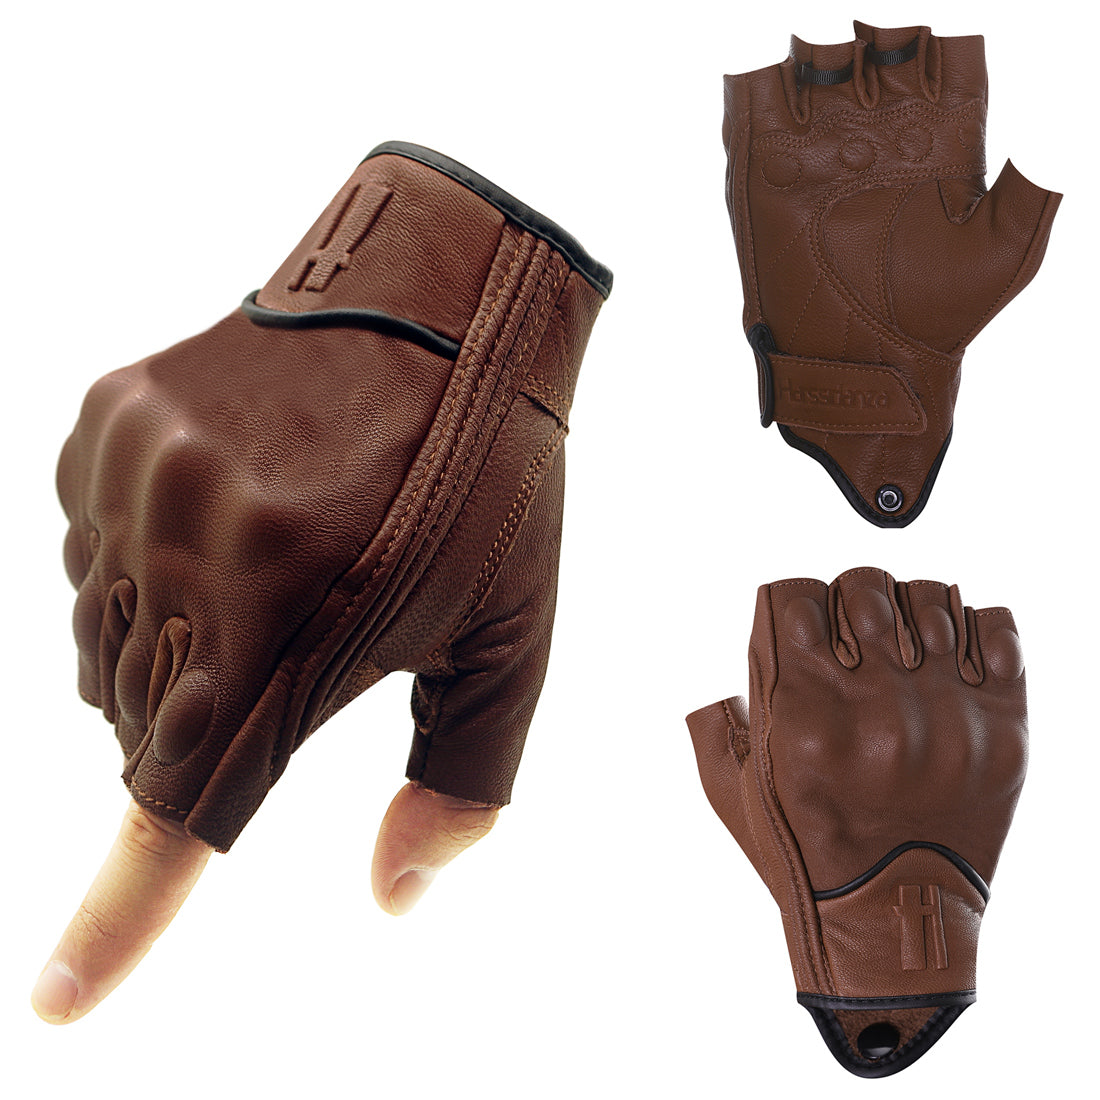 Fingerless Gloves Mens Frosted Genuine Leather Gloves Men Motorcycle Riding  Full Finger Winter Gloves With Fur Vintage Brown Cowhide Leather NR65  231201 From Jiu05, $29.82